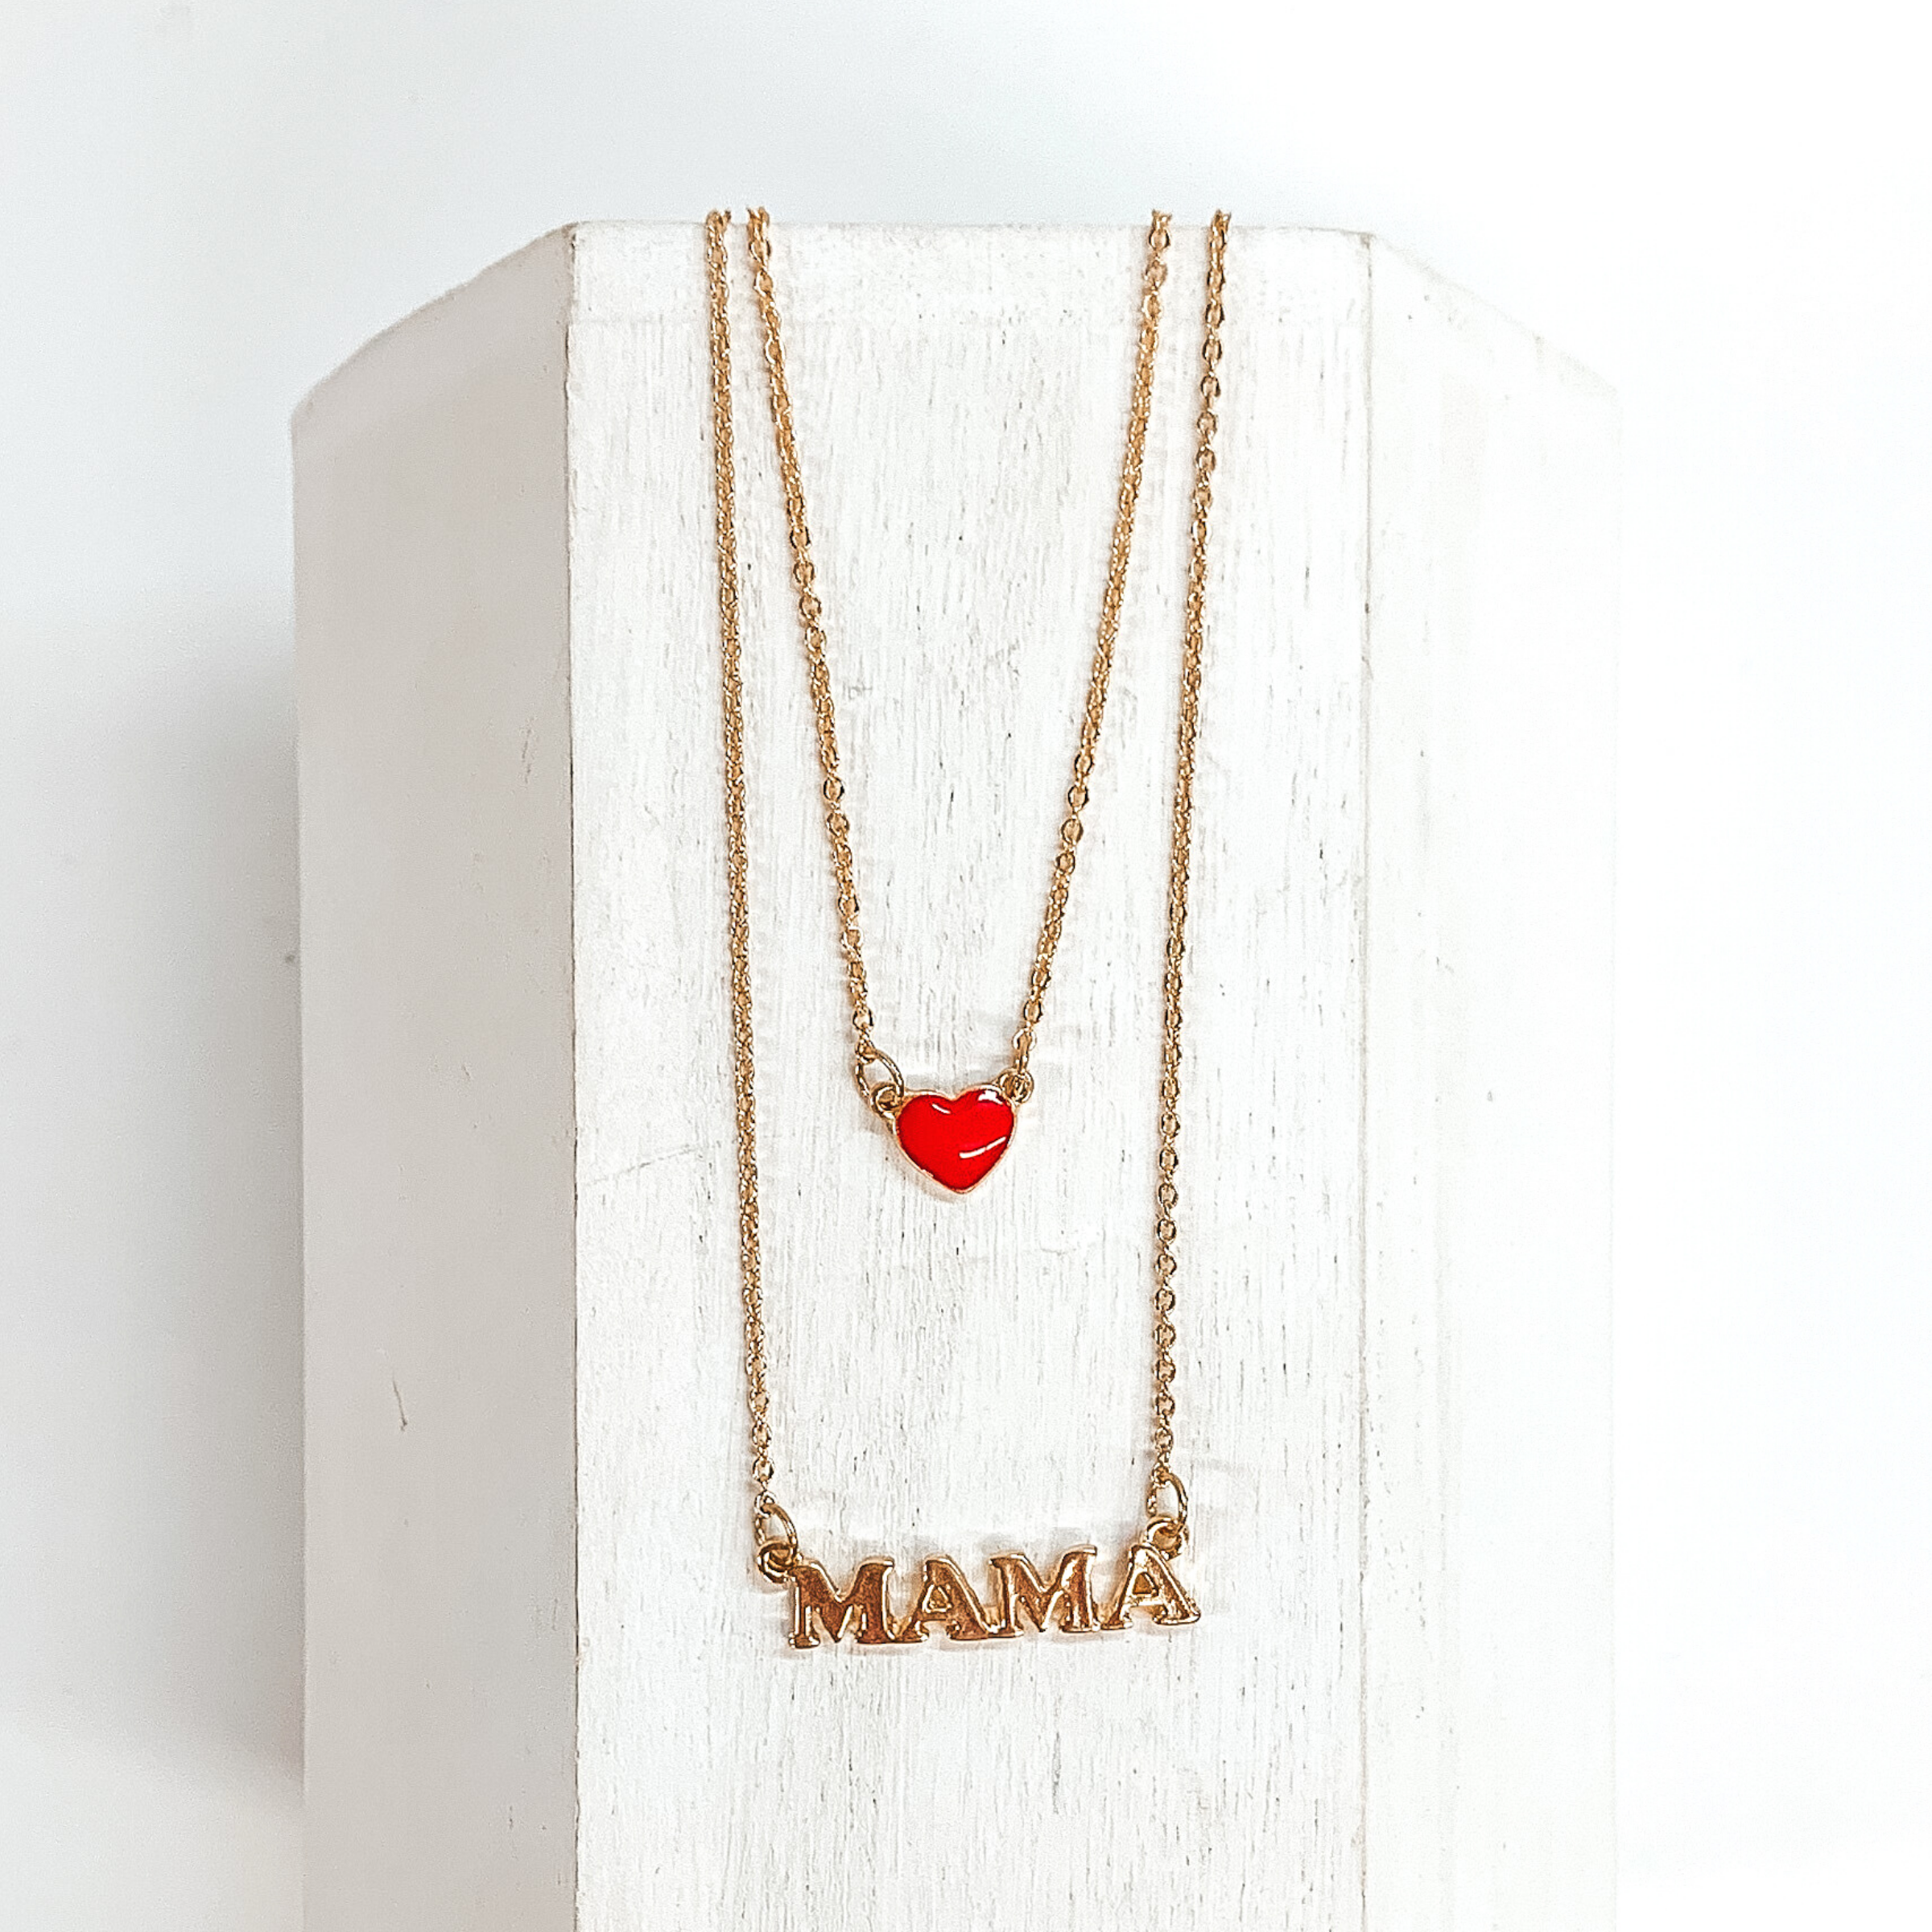 Two stranded gold chained necklace. The longer strand has a gold pendant that spells out "MAMA" and the shorter strand has a small red heart charm. This necklace is pictured laying on a white block on a white background. 